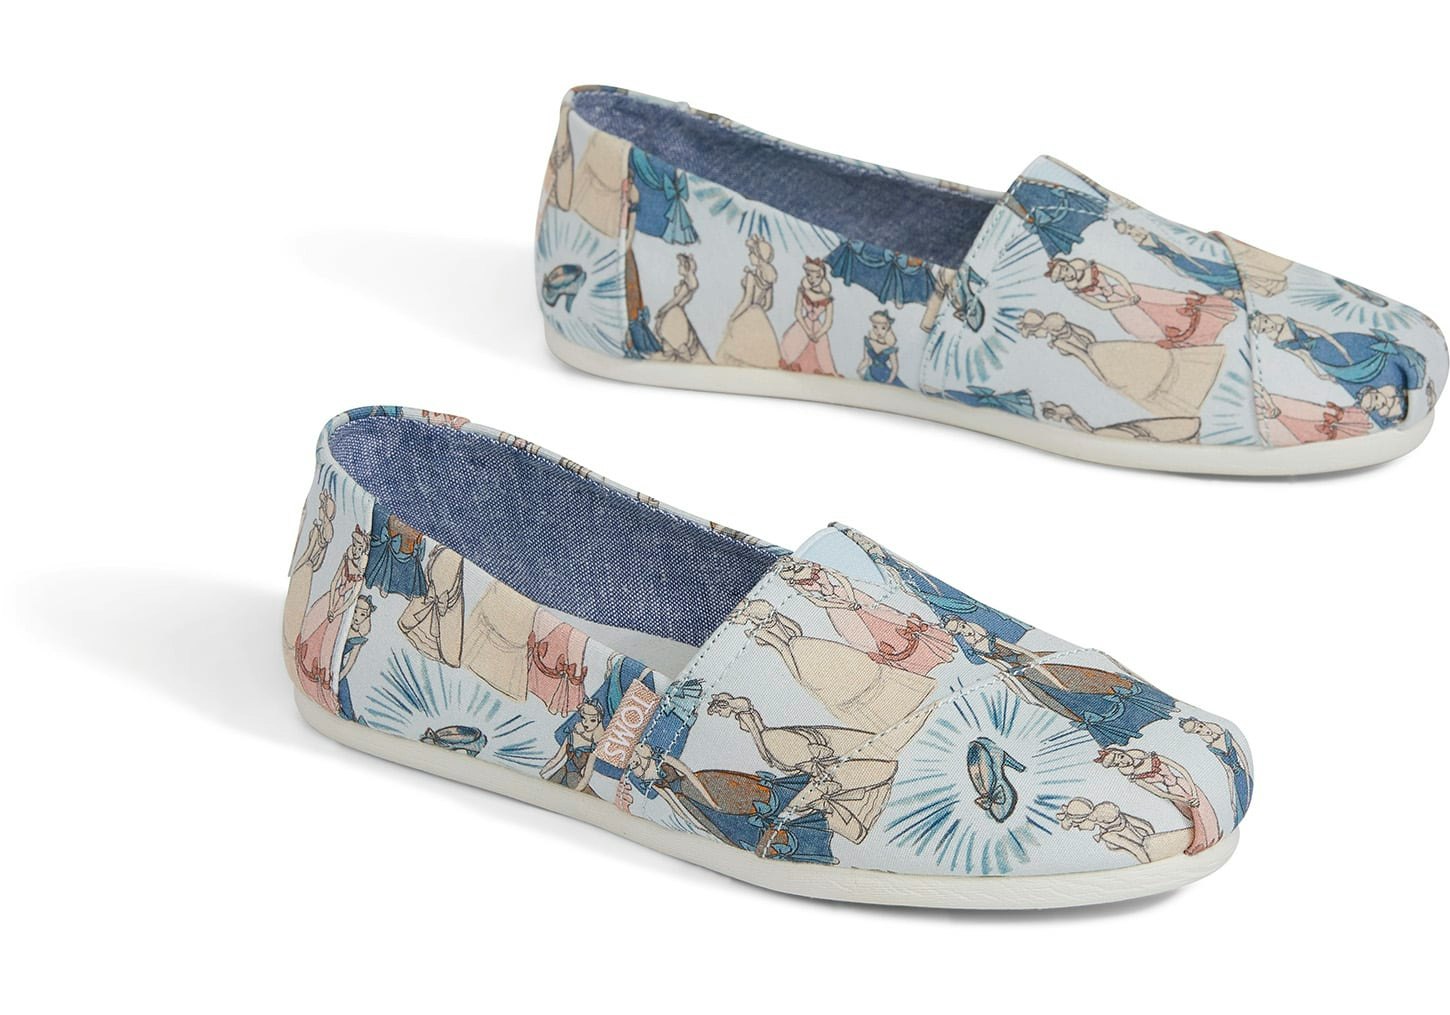 Disney x TOMS Shoes Release Date Is 